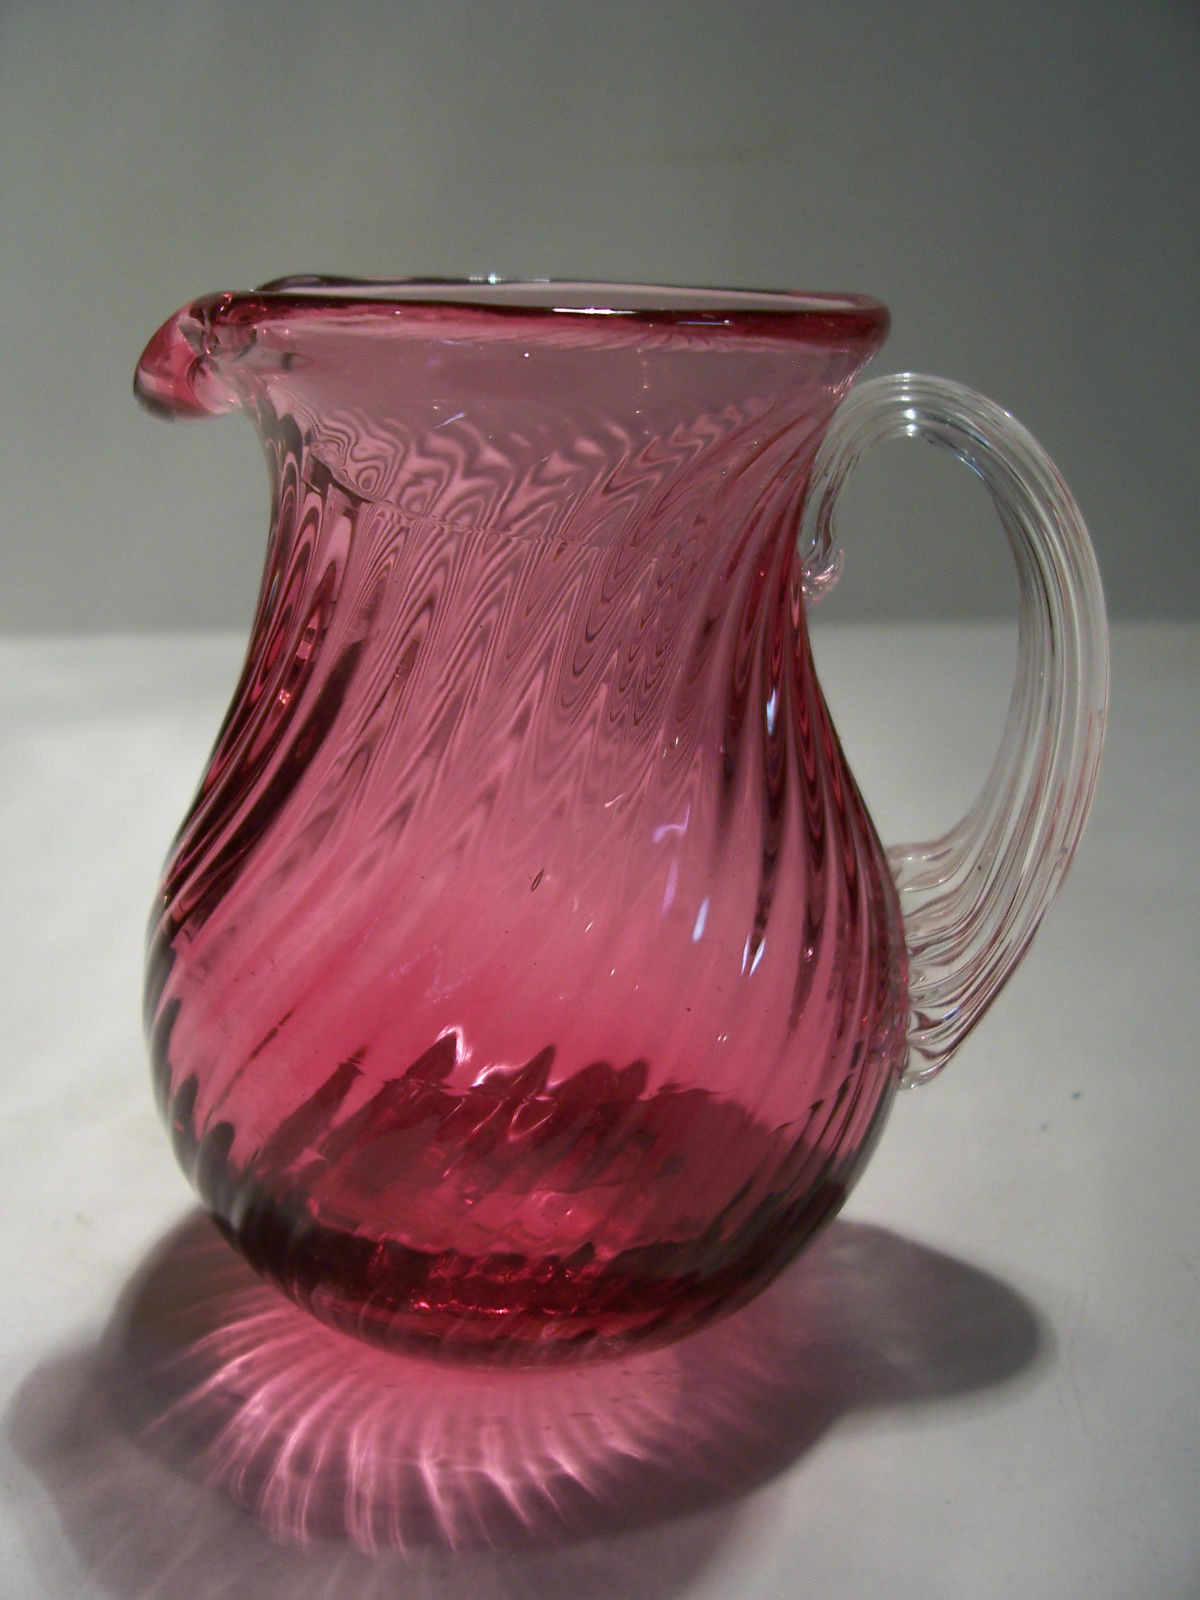 20 Popular Fenton Cranberry Coin Dot Vase 2024 free download fenton cranberry coin dot vase of vintage cranberry glass pitcher creamer 3 3 8 pilgram 9 99 with regard to vintage cranberry glass pitcher creamer 3 3 8 pilgram 1 of 4only 1 available vinta